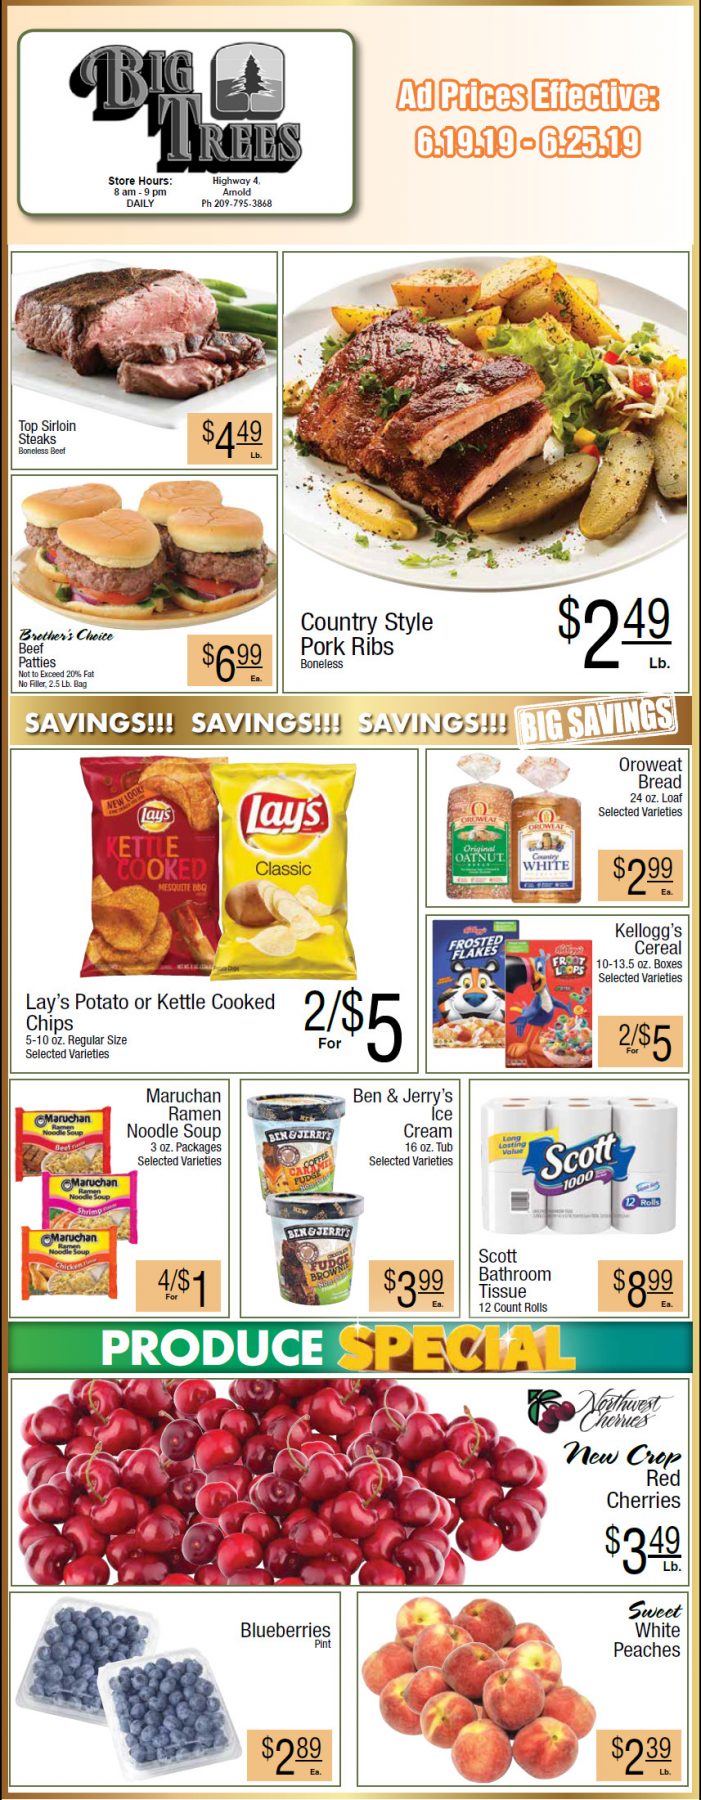 Big Trees Market Weekly Ad & Grocery Specials Through June 25th